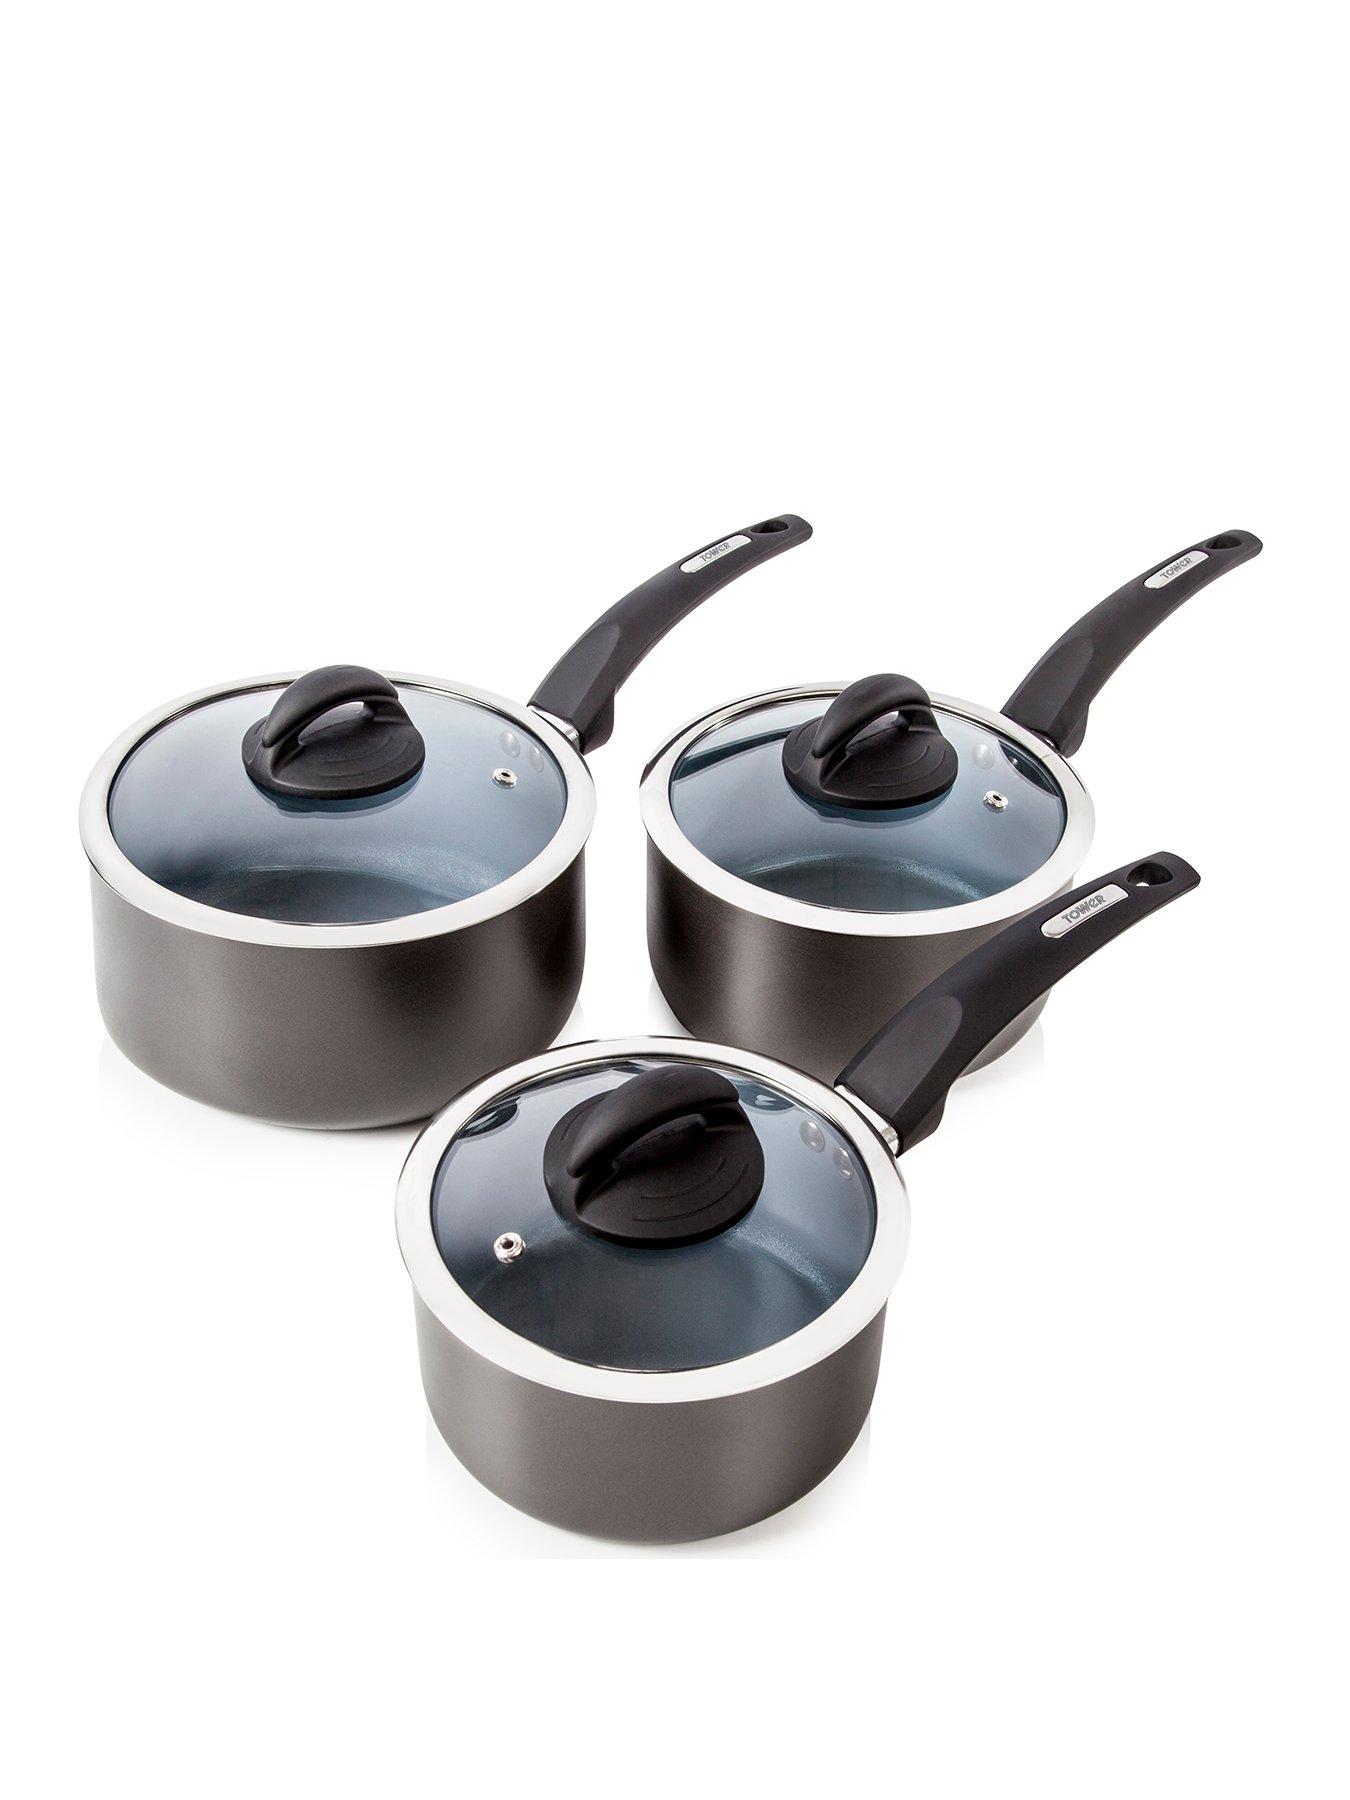 12-Piece with 6 glass Lids Karcher Cookware Set Cast Aluminium with Teflon Classic Non-Stick Coating 1 Pair of Thermal Grips 